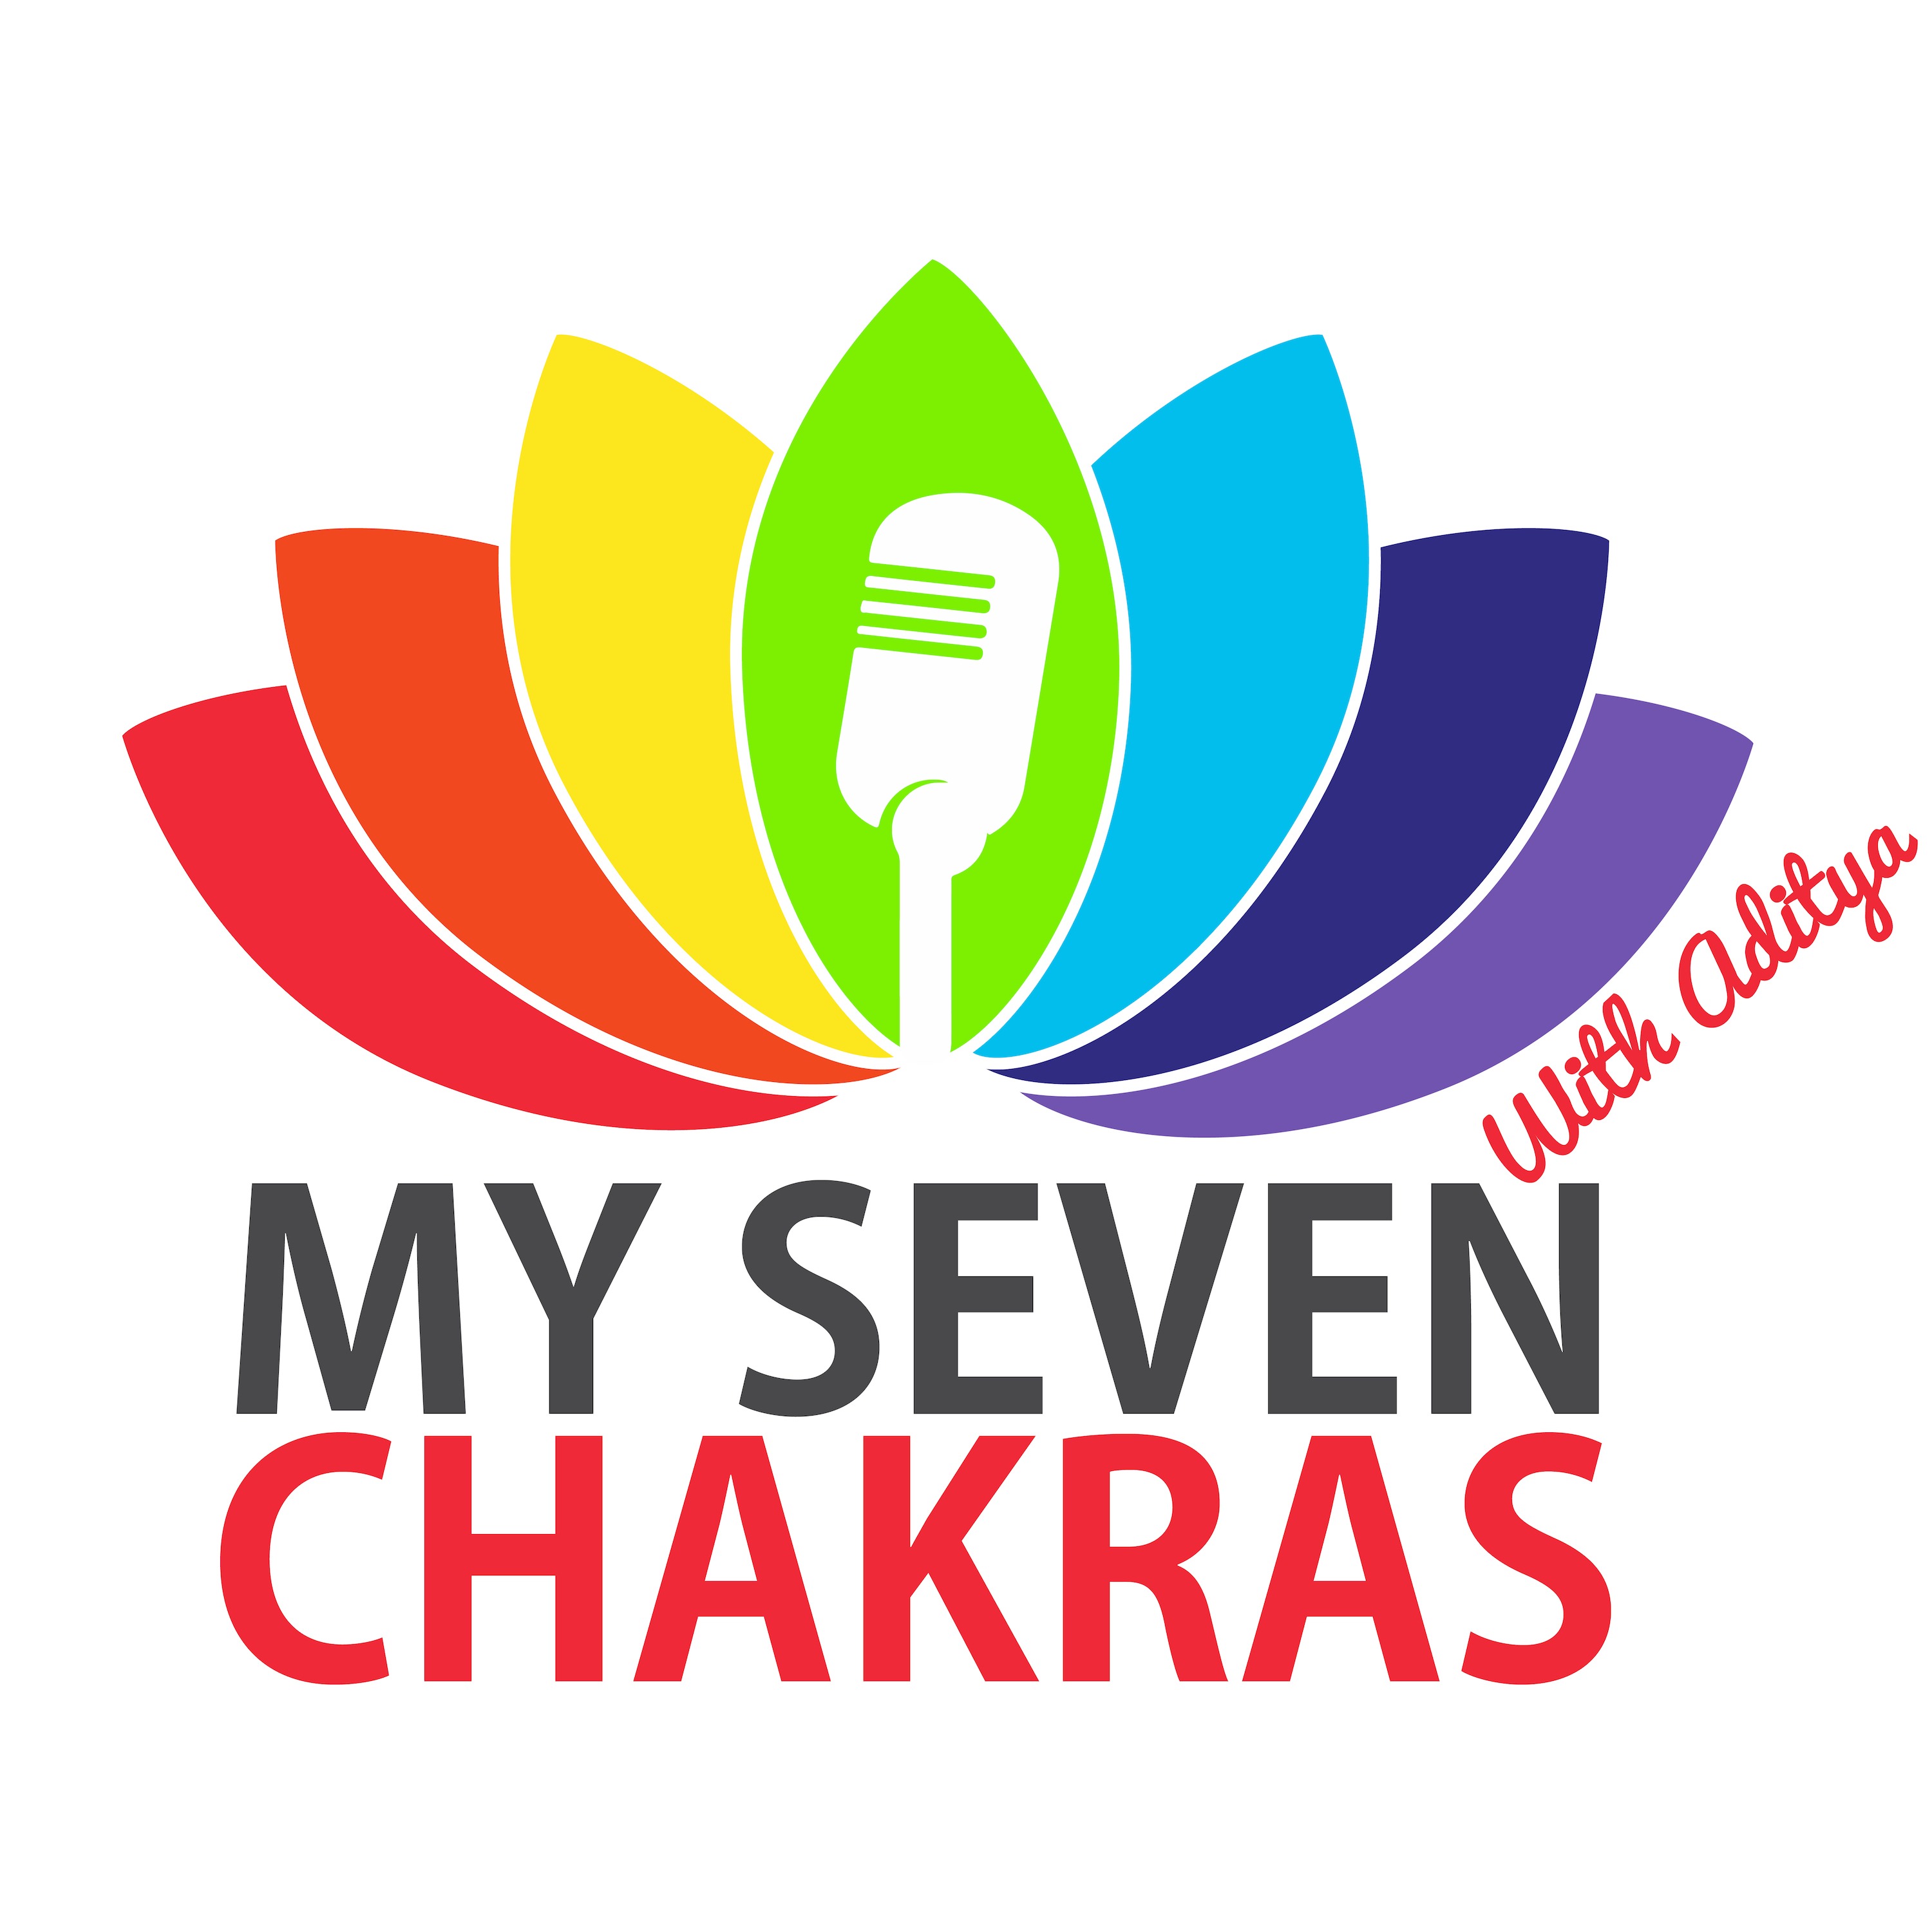 Welcome to the official My Seven Chakras website